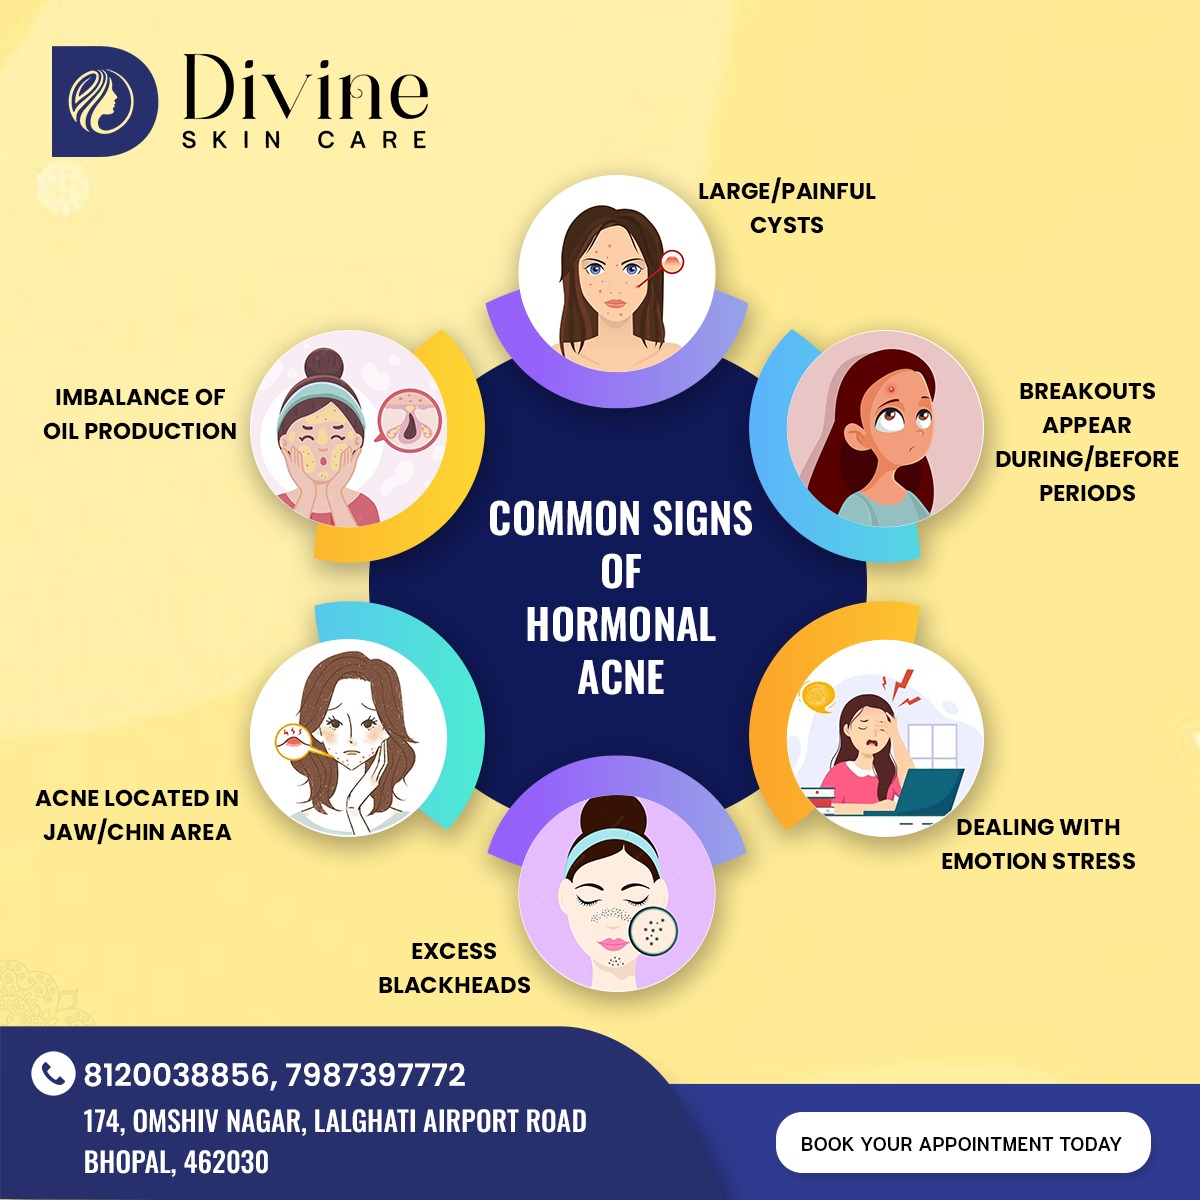 Hormonal acne refers to breakouts that occur due to hormone fluctuations, particularly a rise in androgens such as testosterone. ✨
#hormonalacne #hormonal #acne #acnehormones #healthyskin #skin #care #health #procedure #skintreatement #divineskinclinic #divine #divineskincare